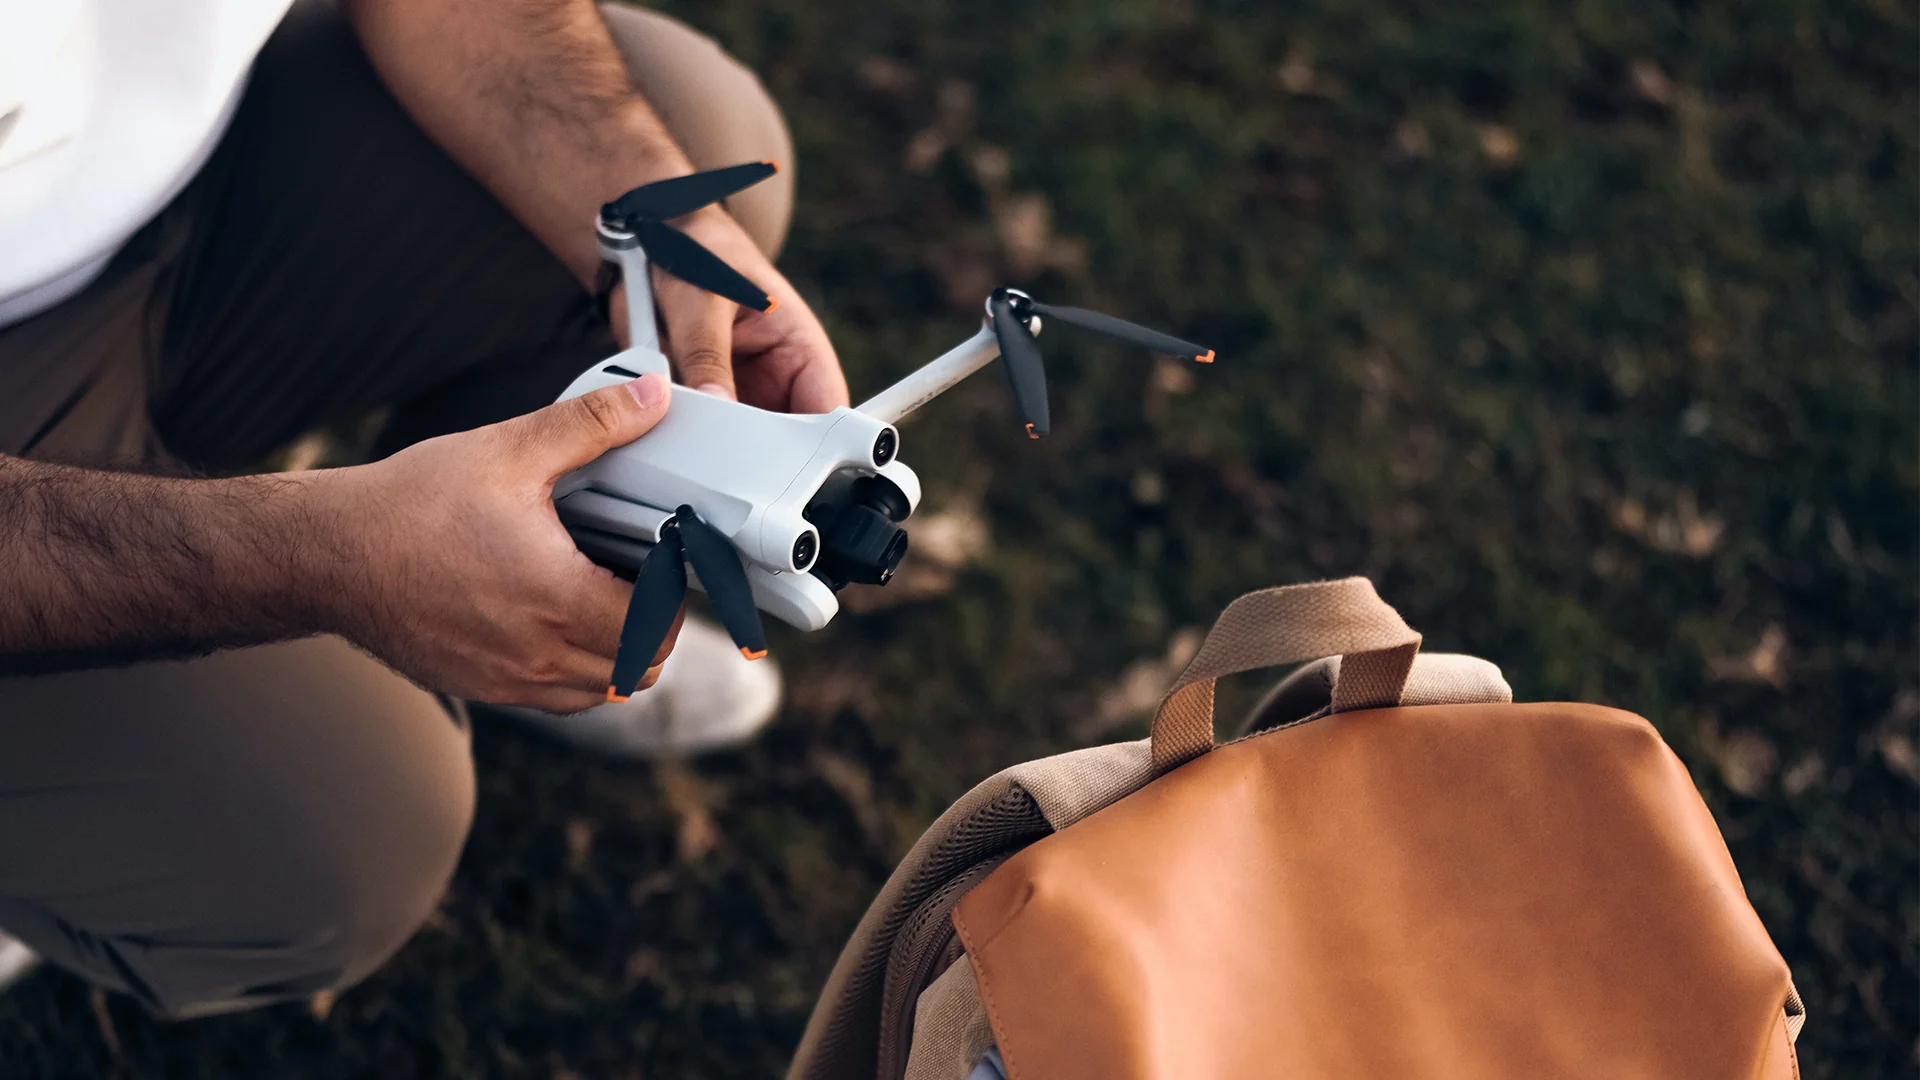 The 10 tips for new drone pilots